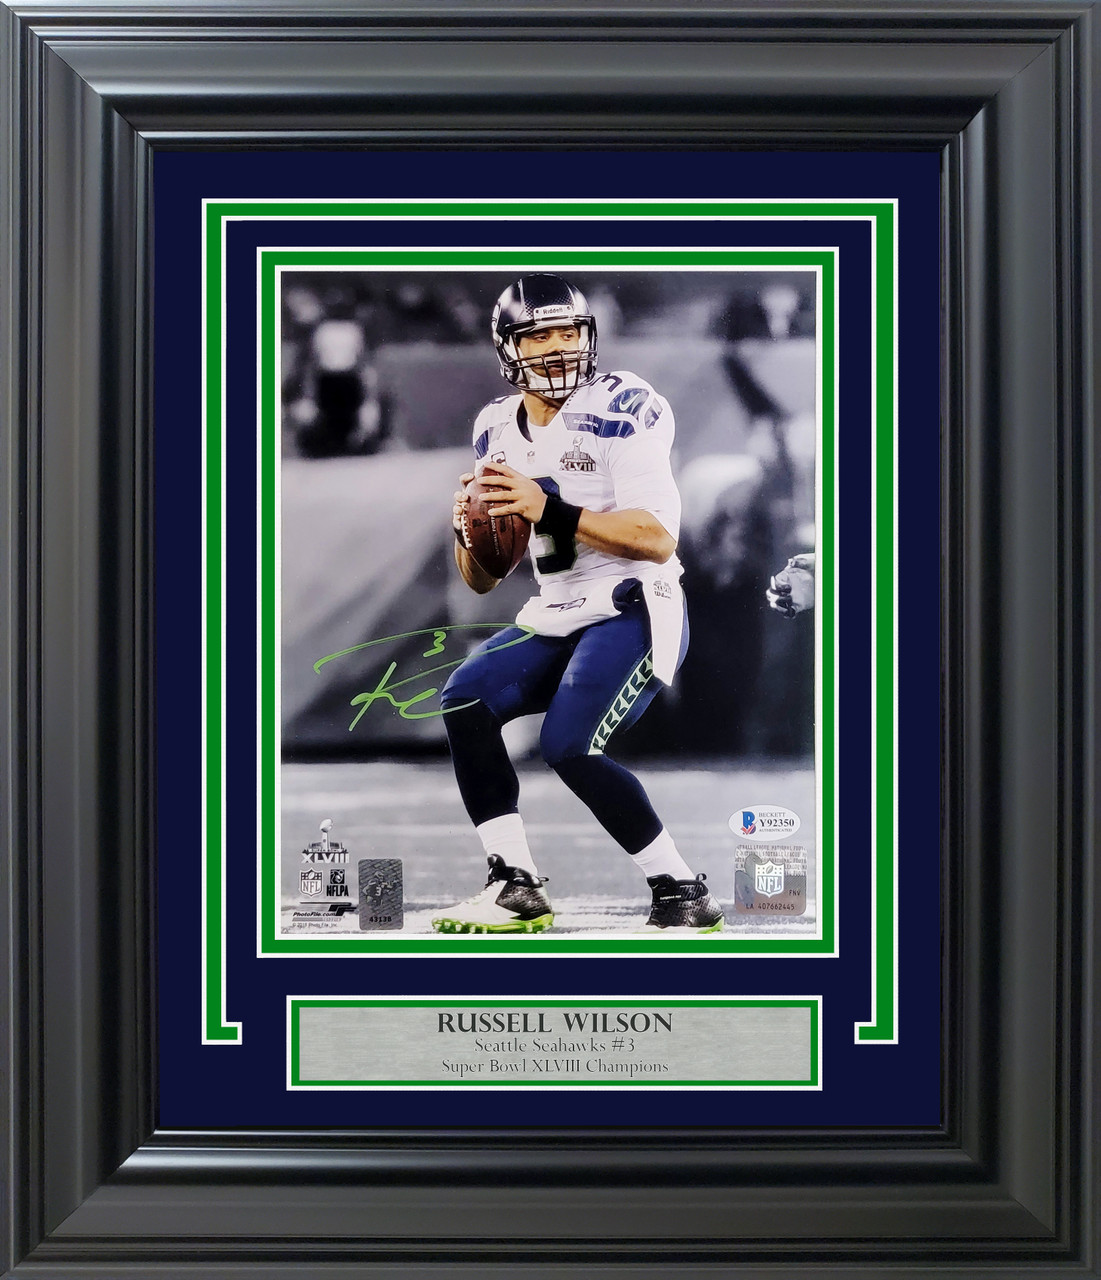 Russell Wilson Autographed Framed 8x10 Photo Seattle Seahawks